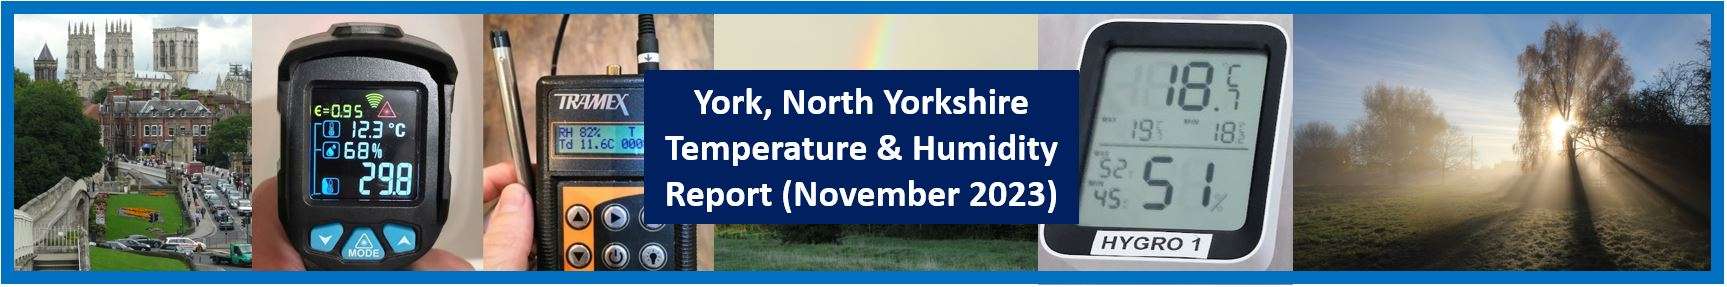 Temperature and Humidity in York - November 2023